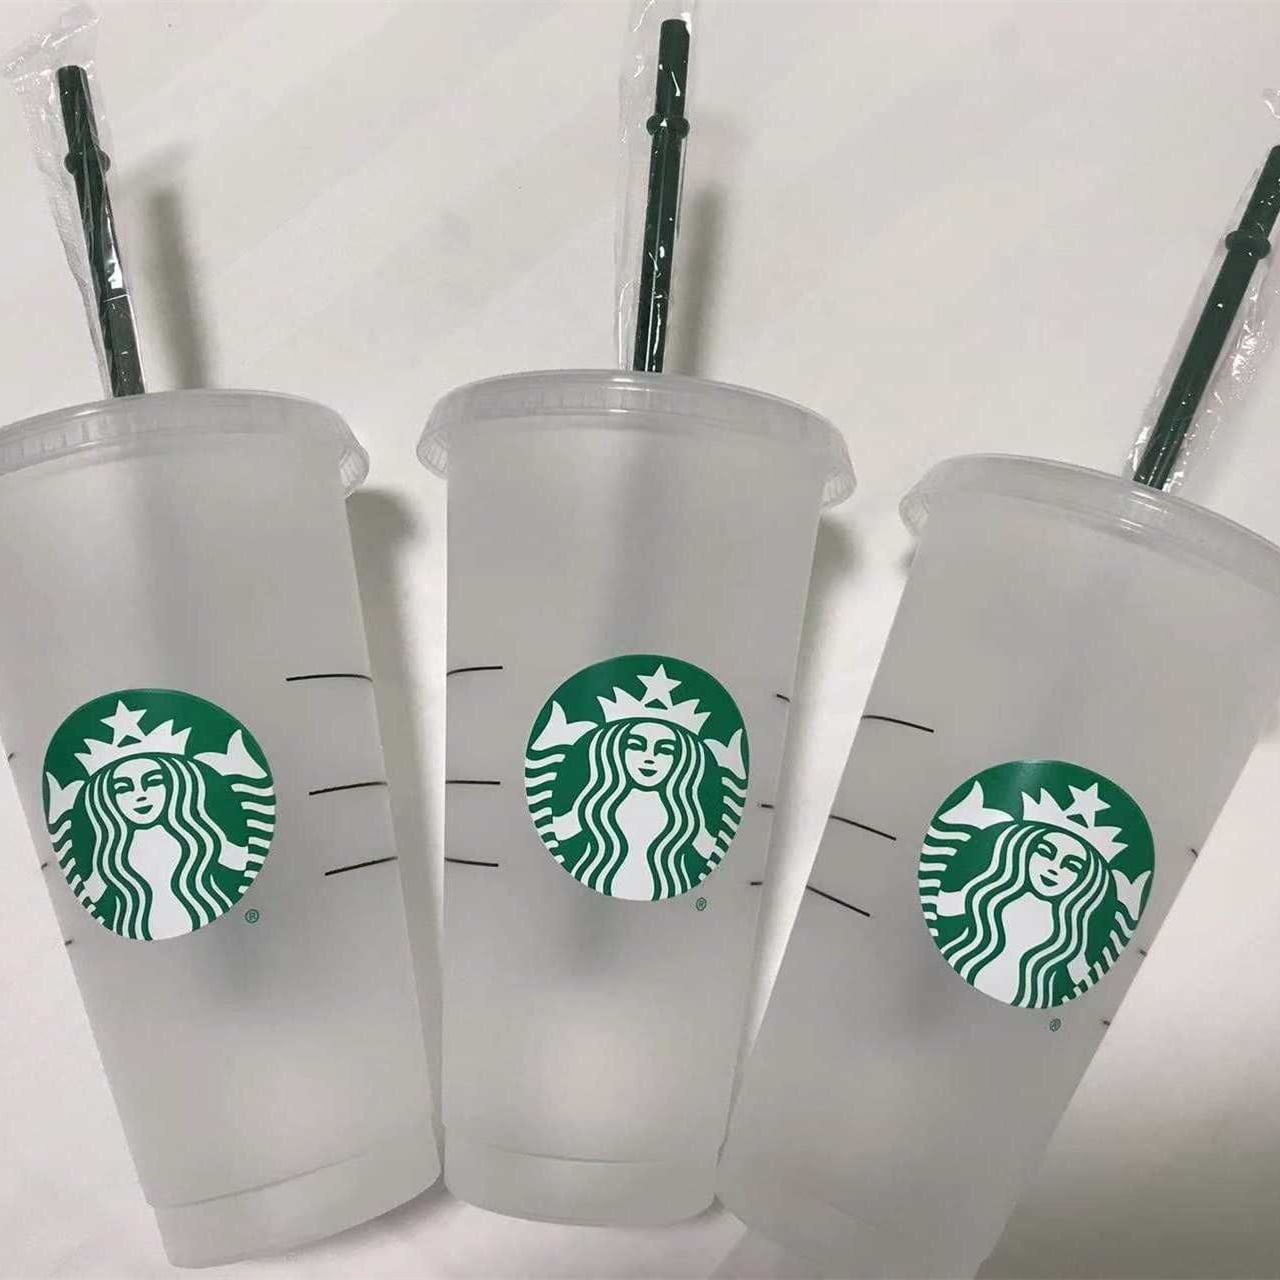 2 Starbucks Grande Clear Acrylic 16 oz Tumblers & 1 Reusable Frosted 24 oz.